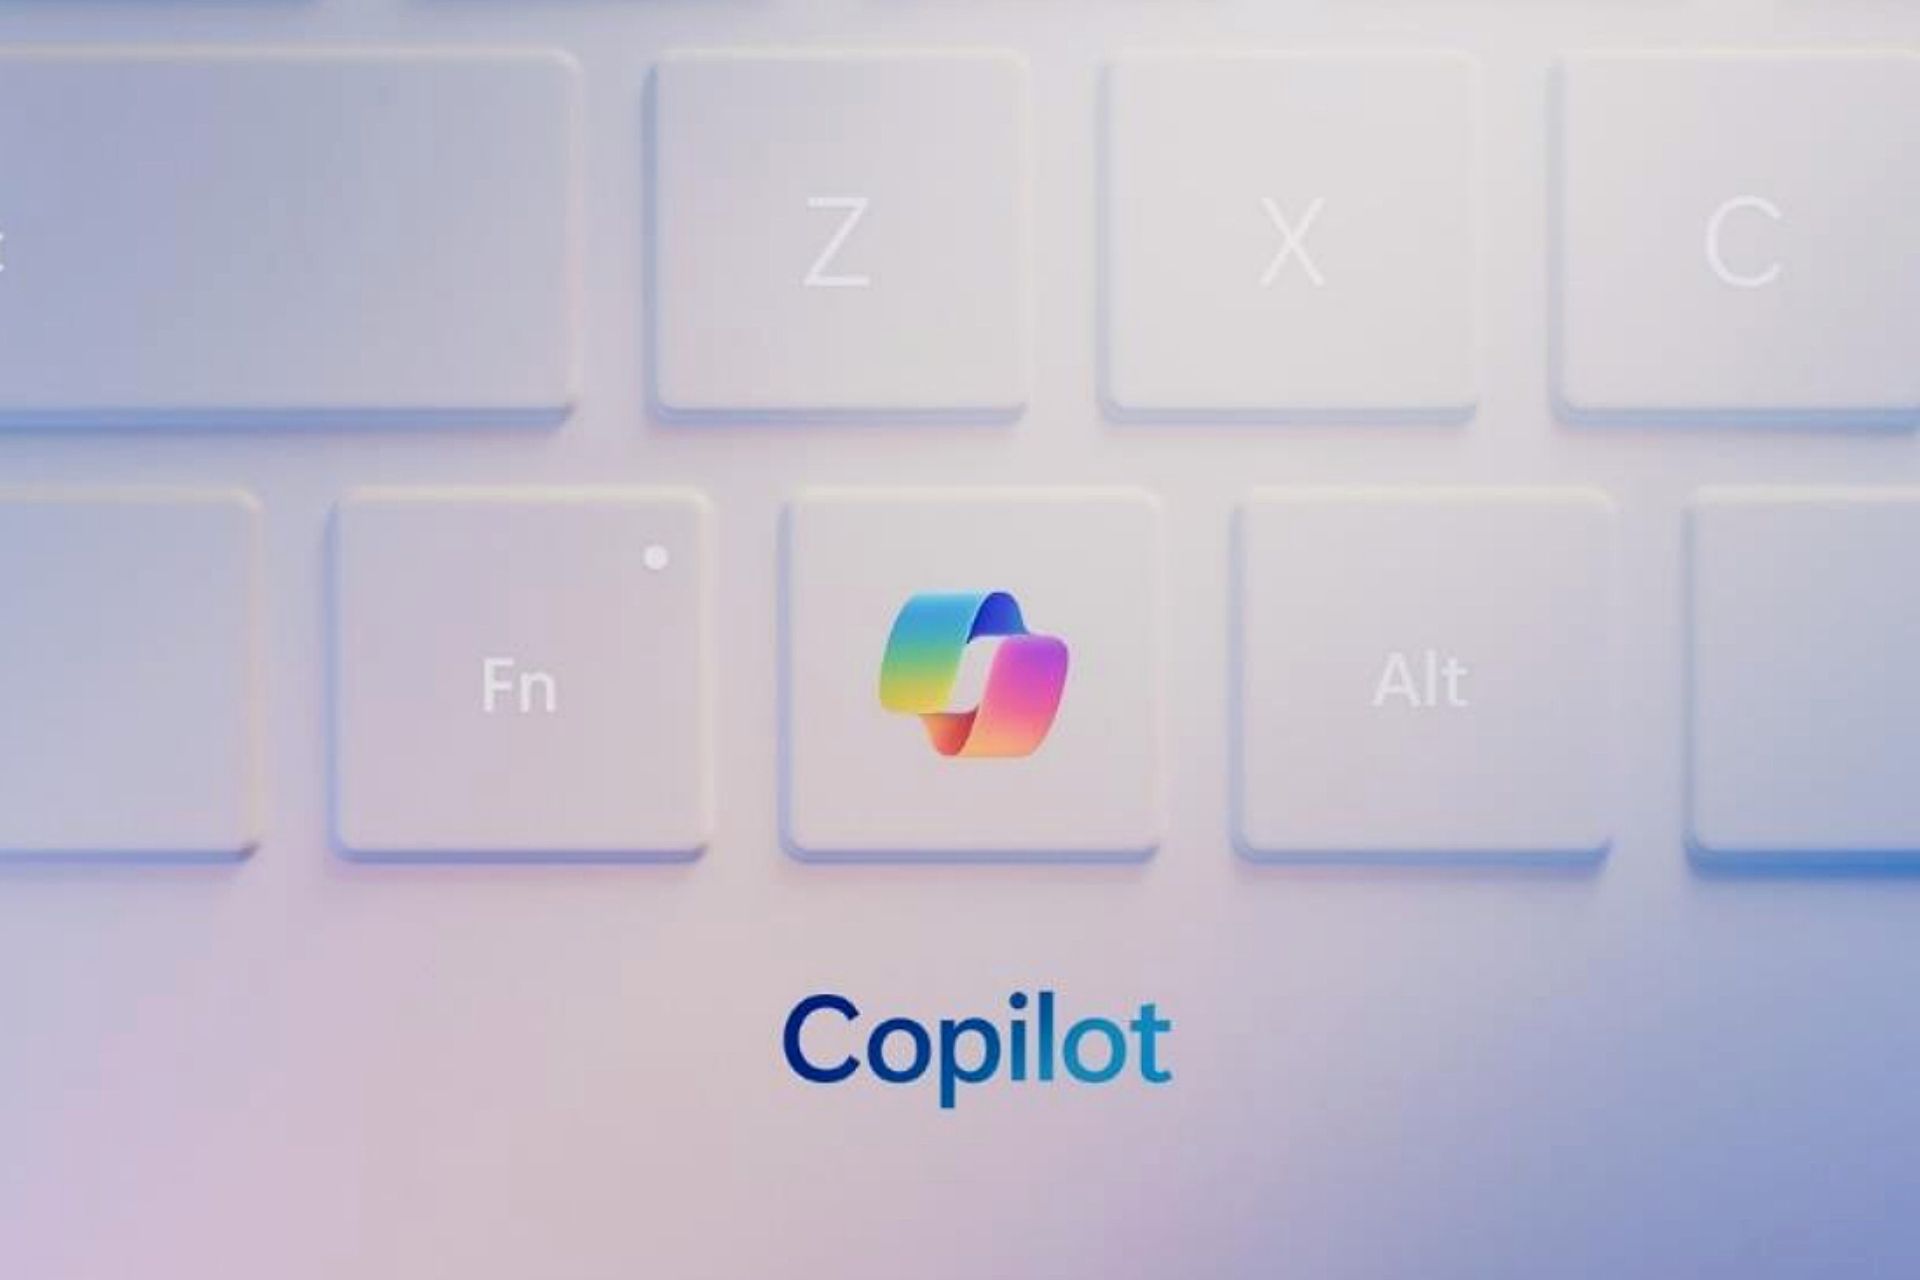 Microsoft retires the Win+C keyboard shortcut for Copilot, promotes the Copilot key instead